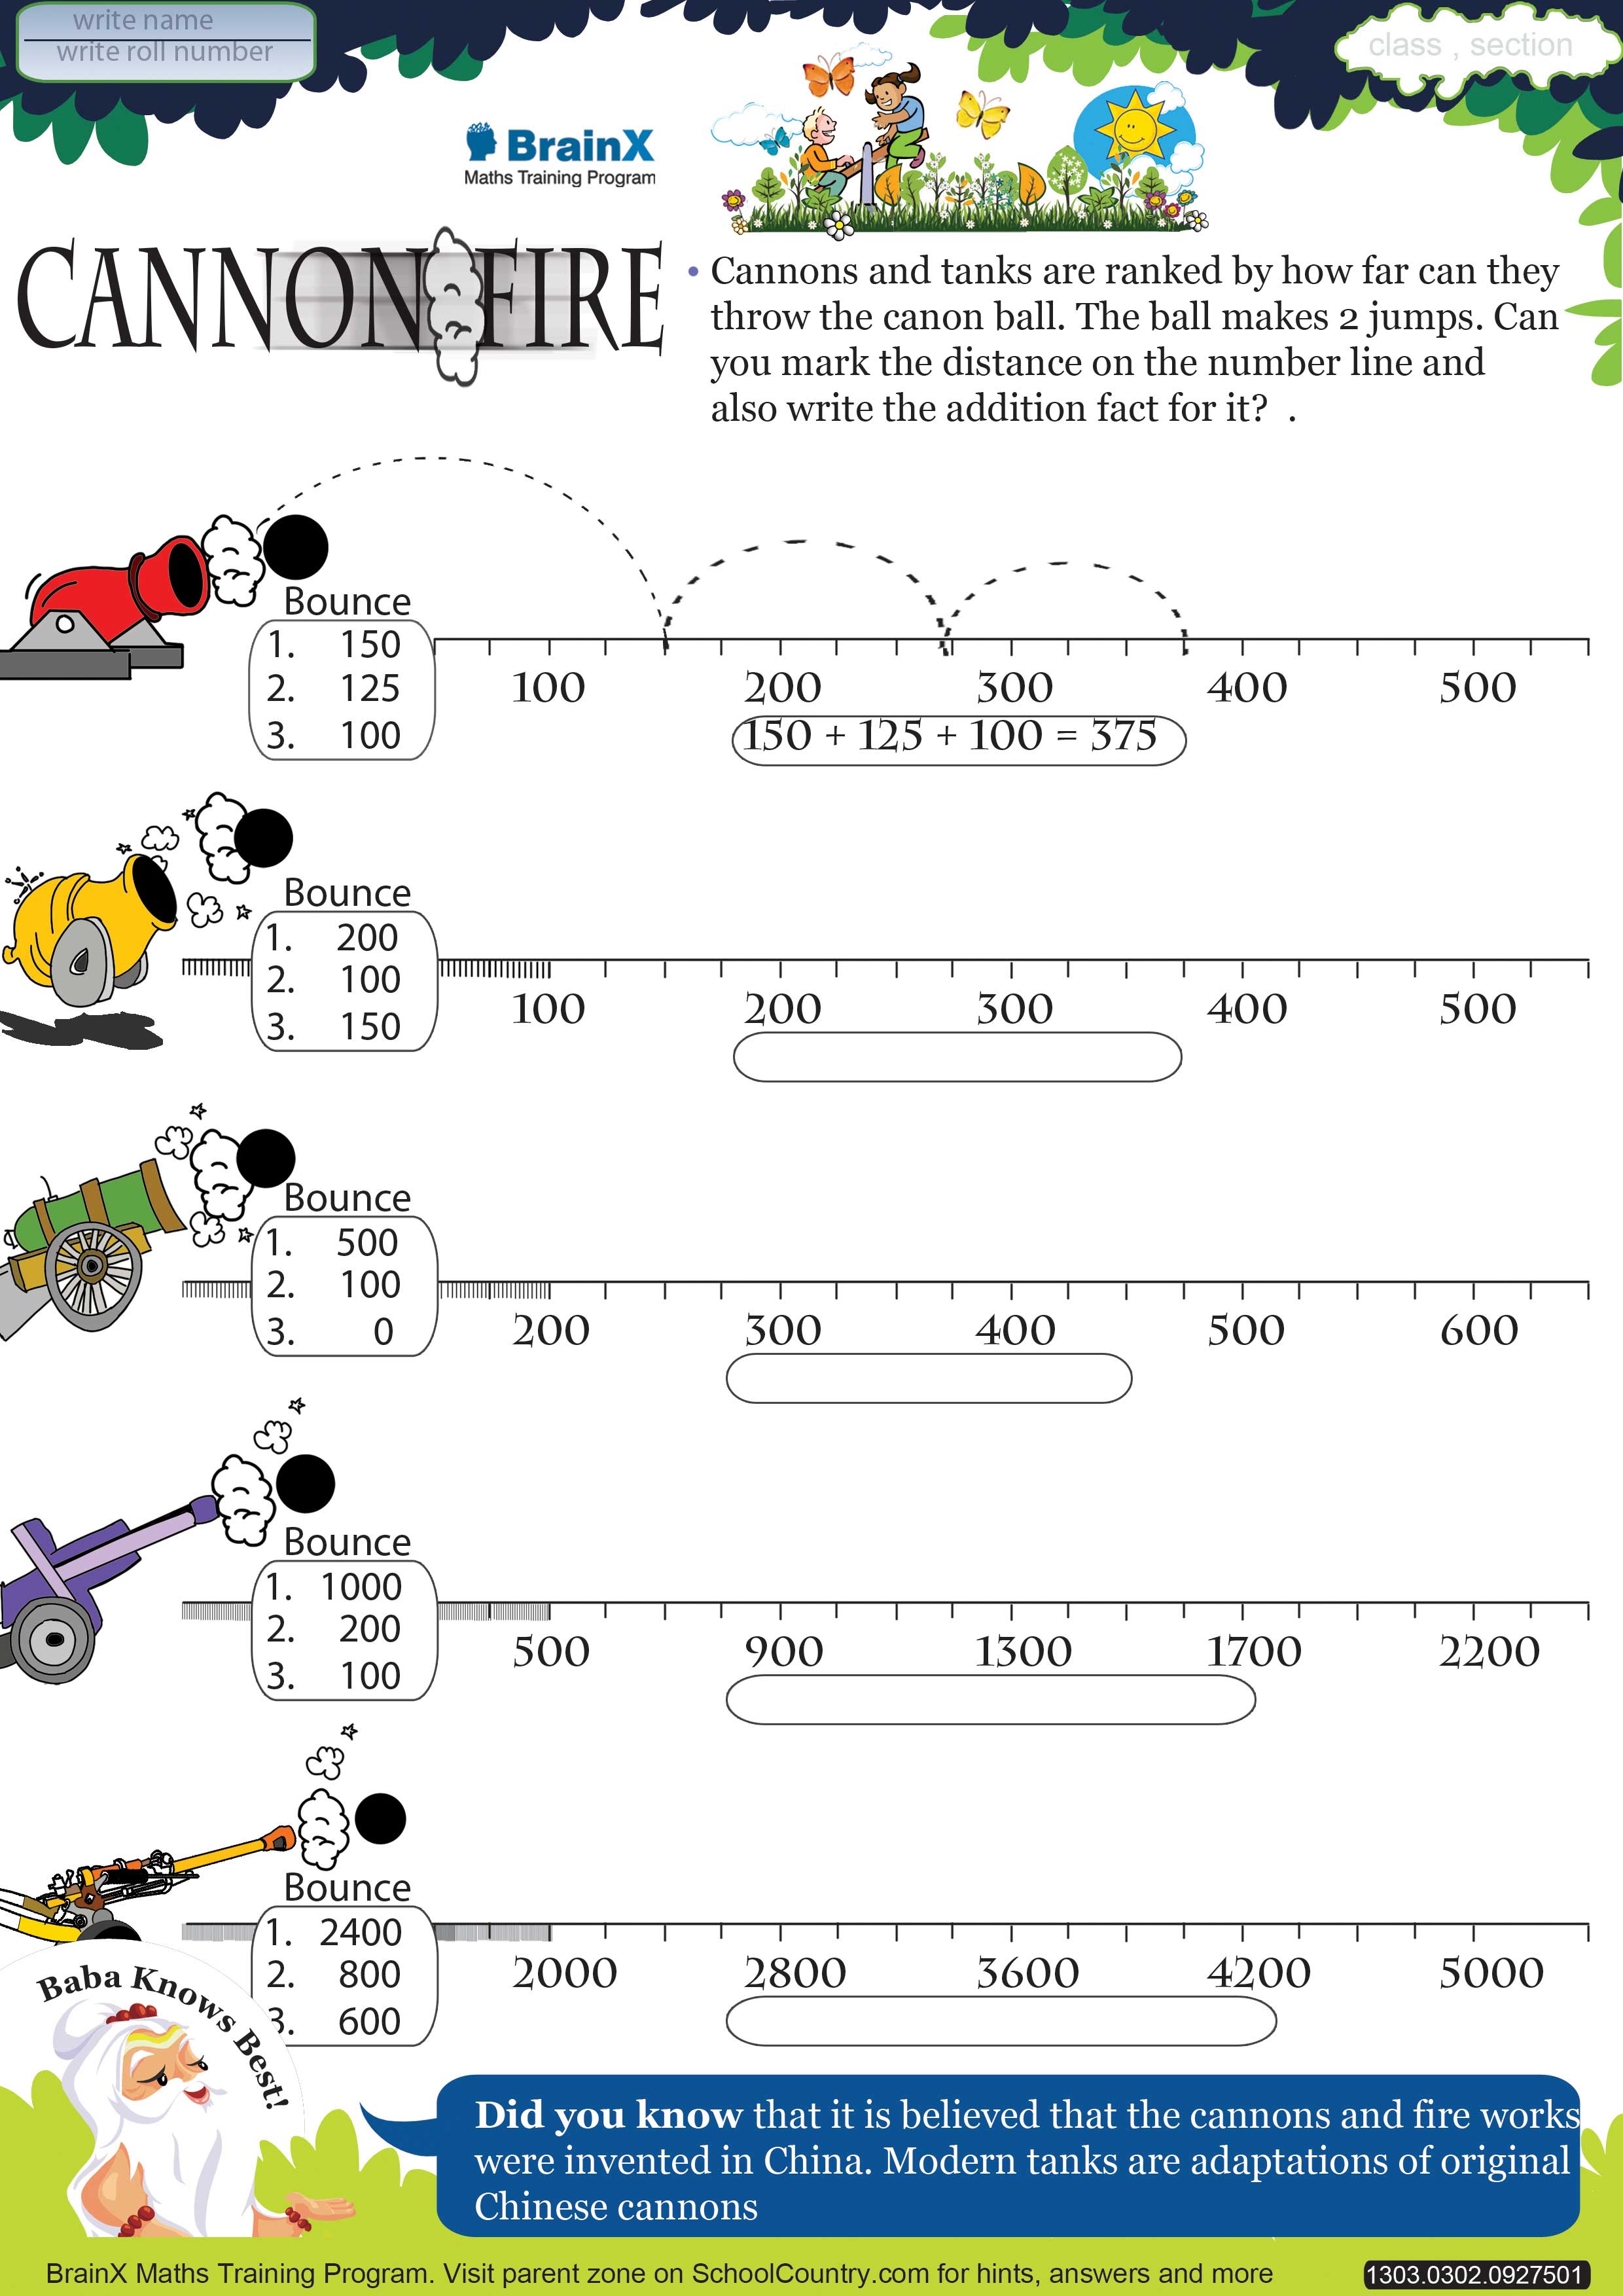 printable-addition-math-olympiad-worksheets-for-kids-of-grade-3-cannon-fire